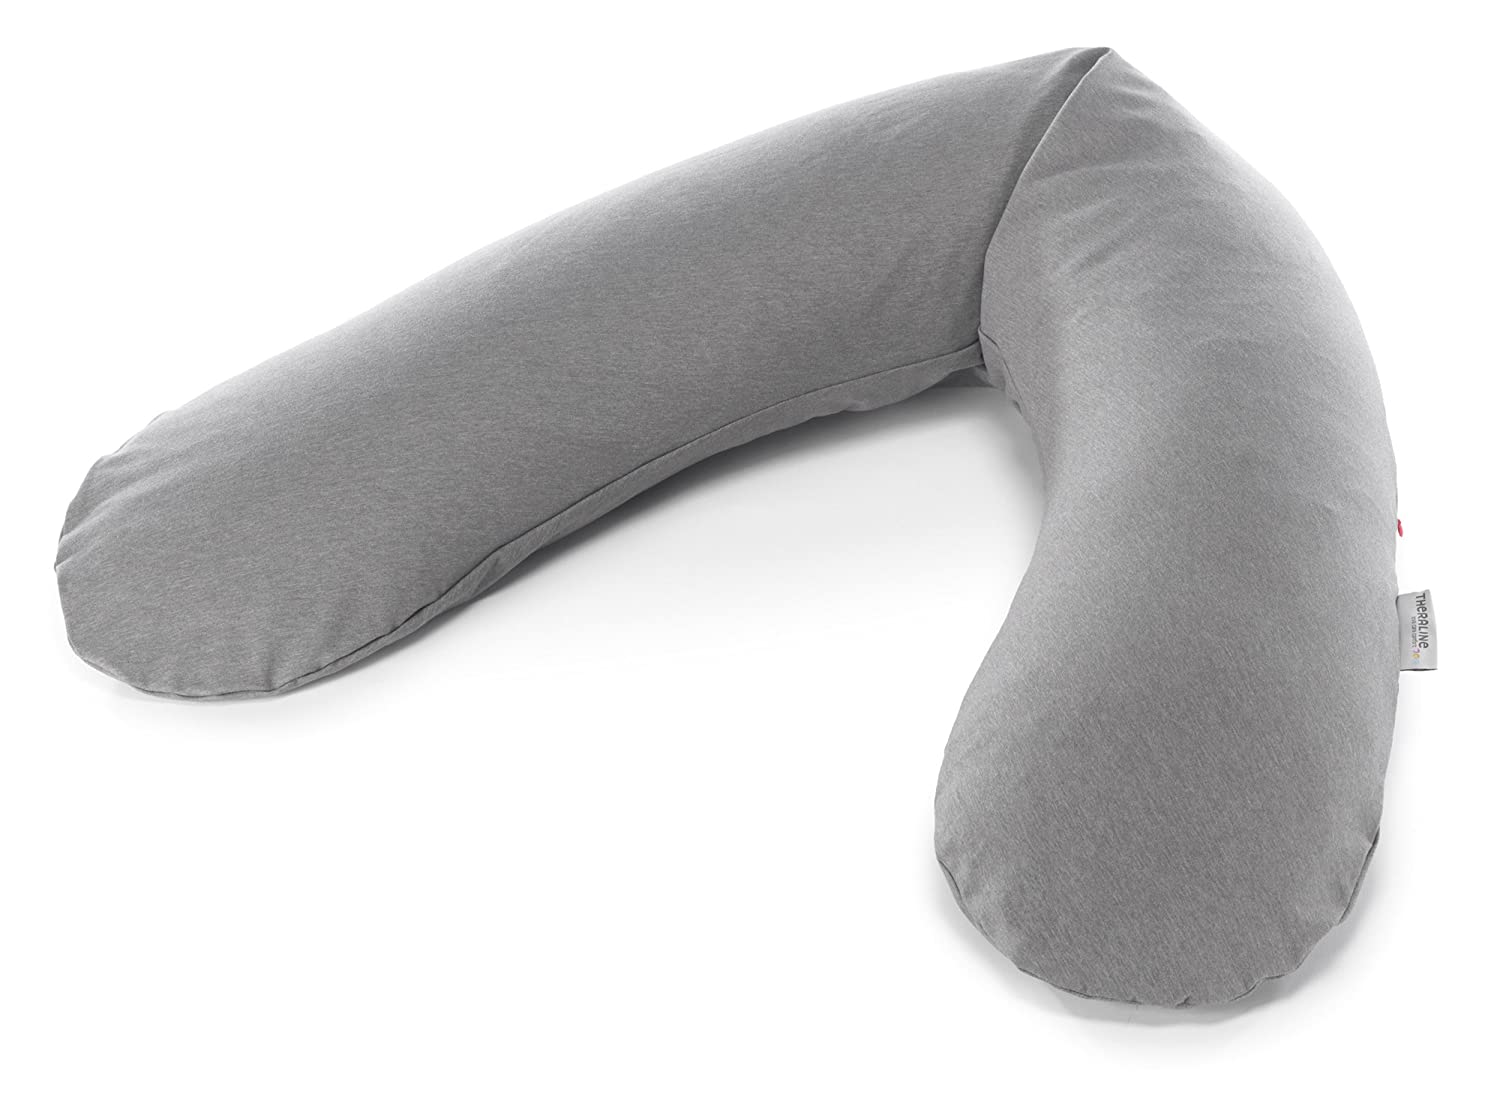 Replacement Cover For The Original Theraline Pregnancy And Nursing Pillow, 100% Cotton. Uni Melange medium grey